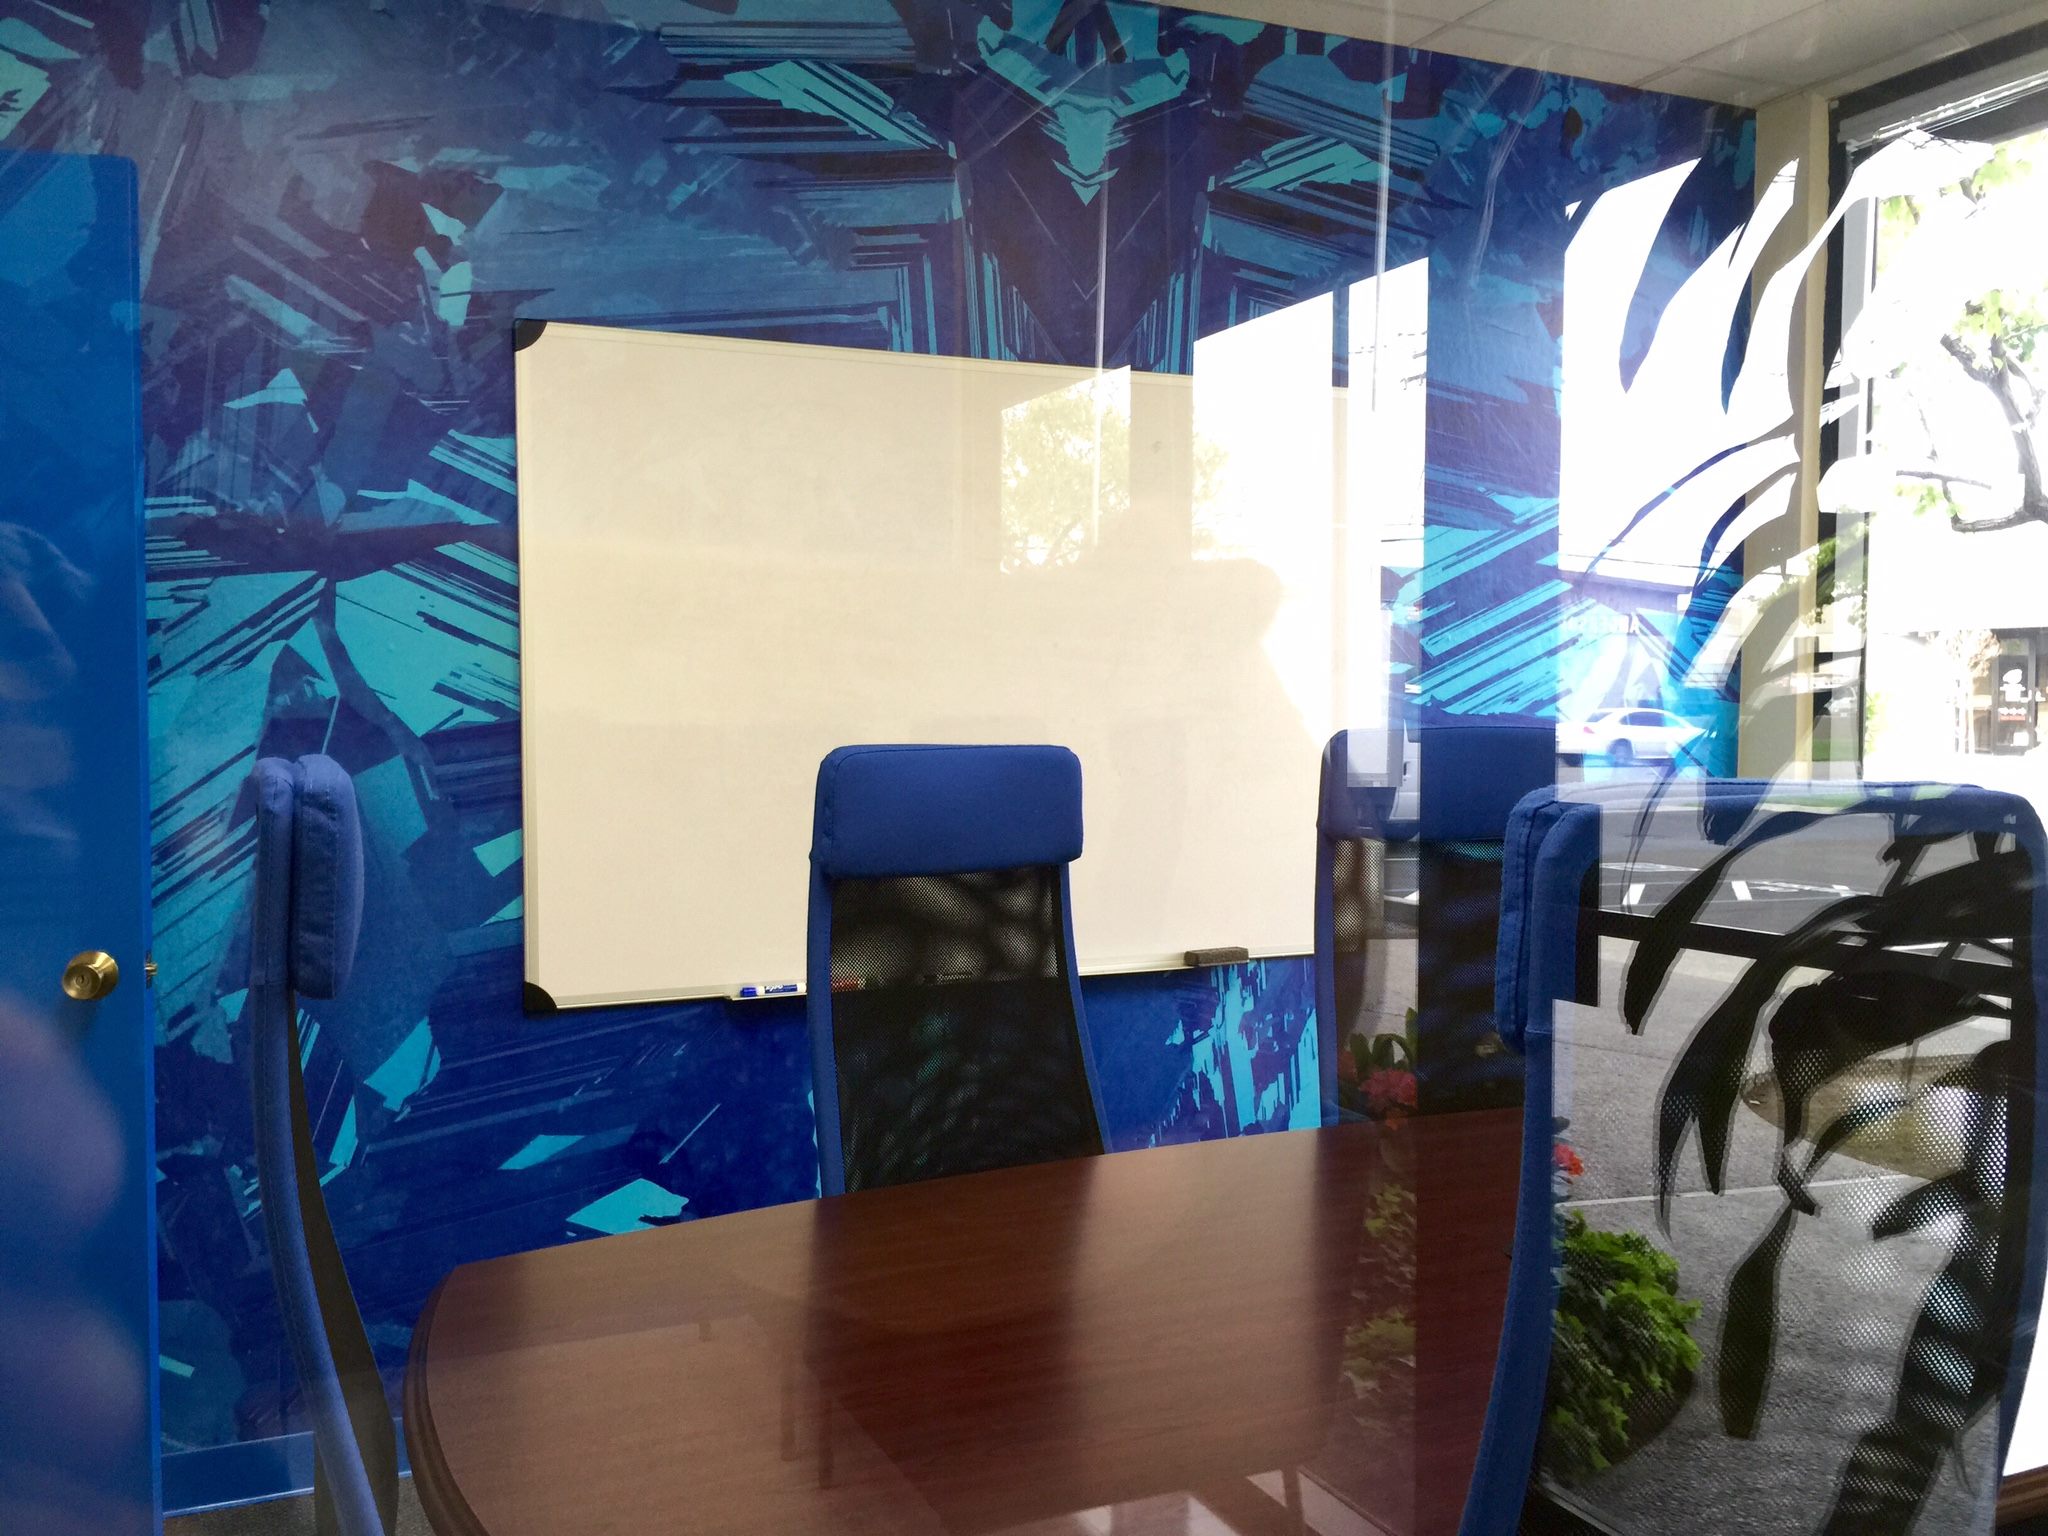 Gridtential meeting room completed makeover from bland white walls.